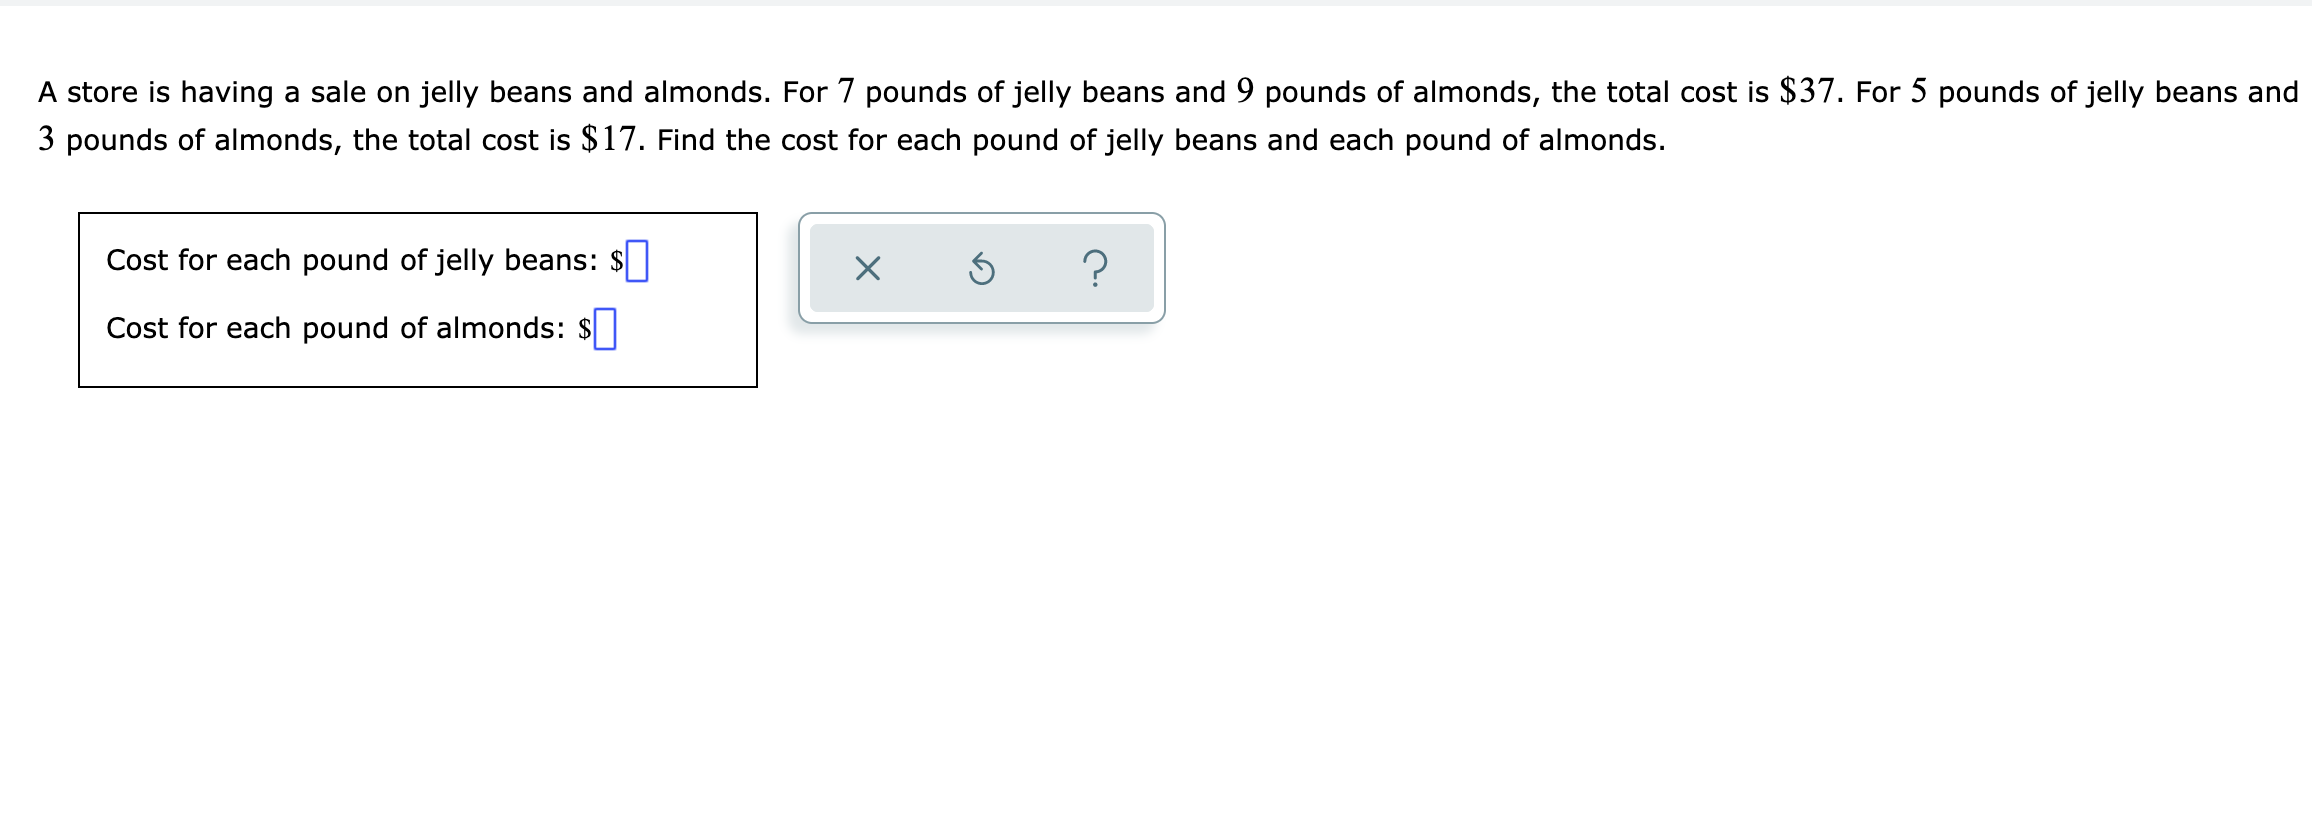 A store is having a sale on jelly beans and almonds. For 7 pounds of jelly beans and 9 pounds of almonds, the total cost is $37. For 5 pounds of jelly beans and
3 pounds of almonds, the total cost is $17. Find the cost for each pound of jelly beans and each pound of almonds.
Cost for each pound of jelly beans: $
Cost for each pound of almonds:
